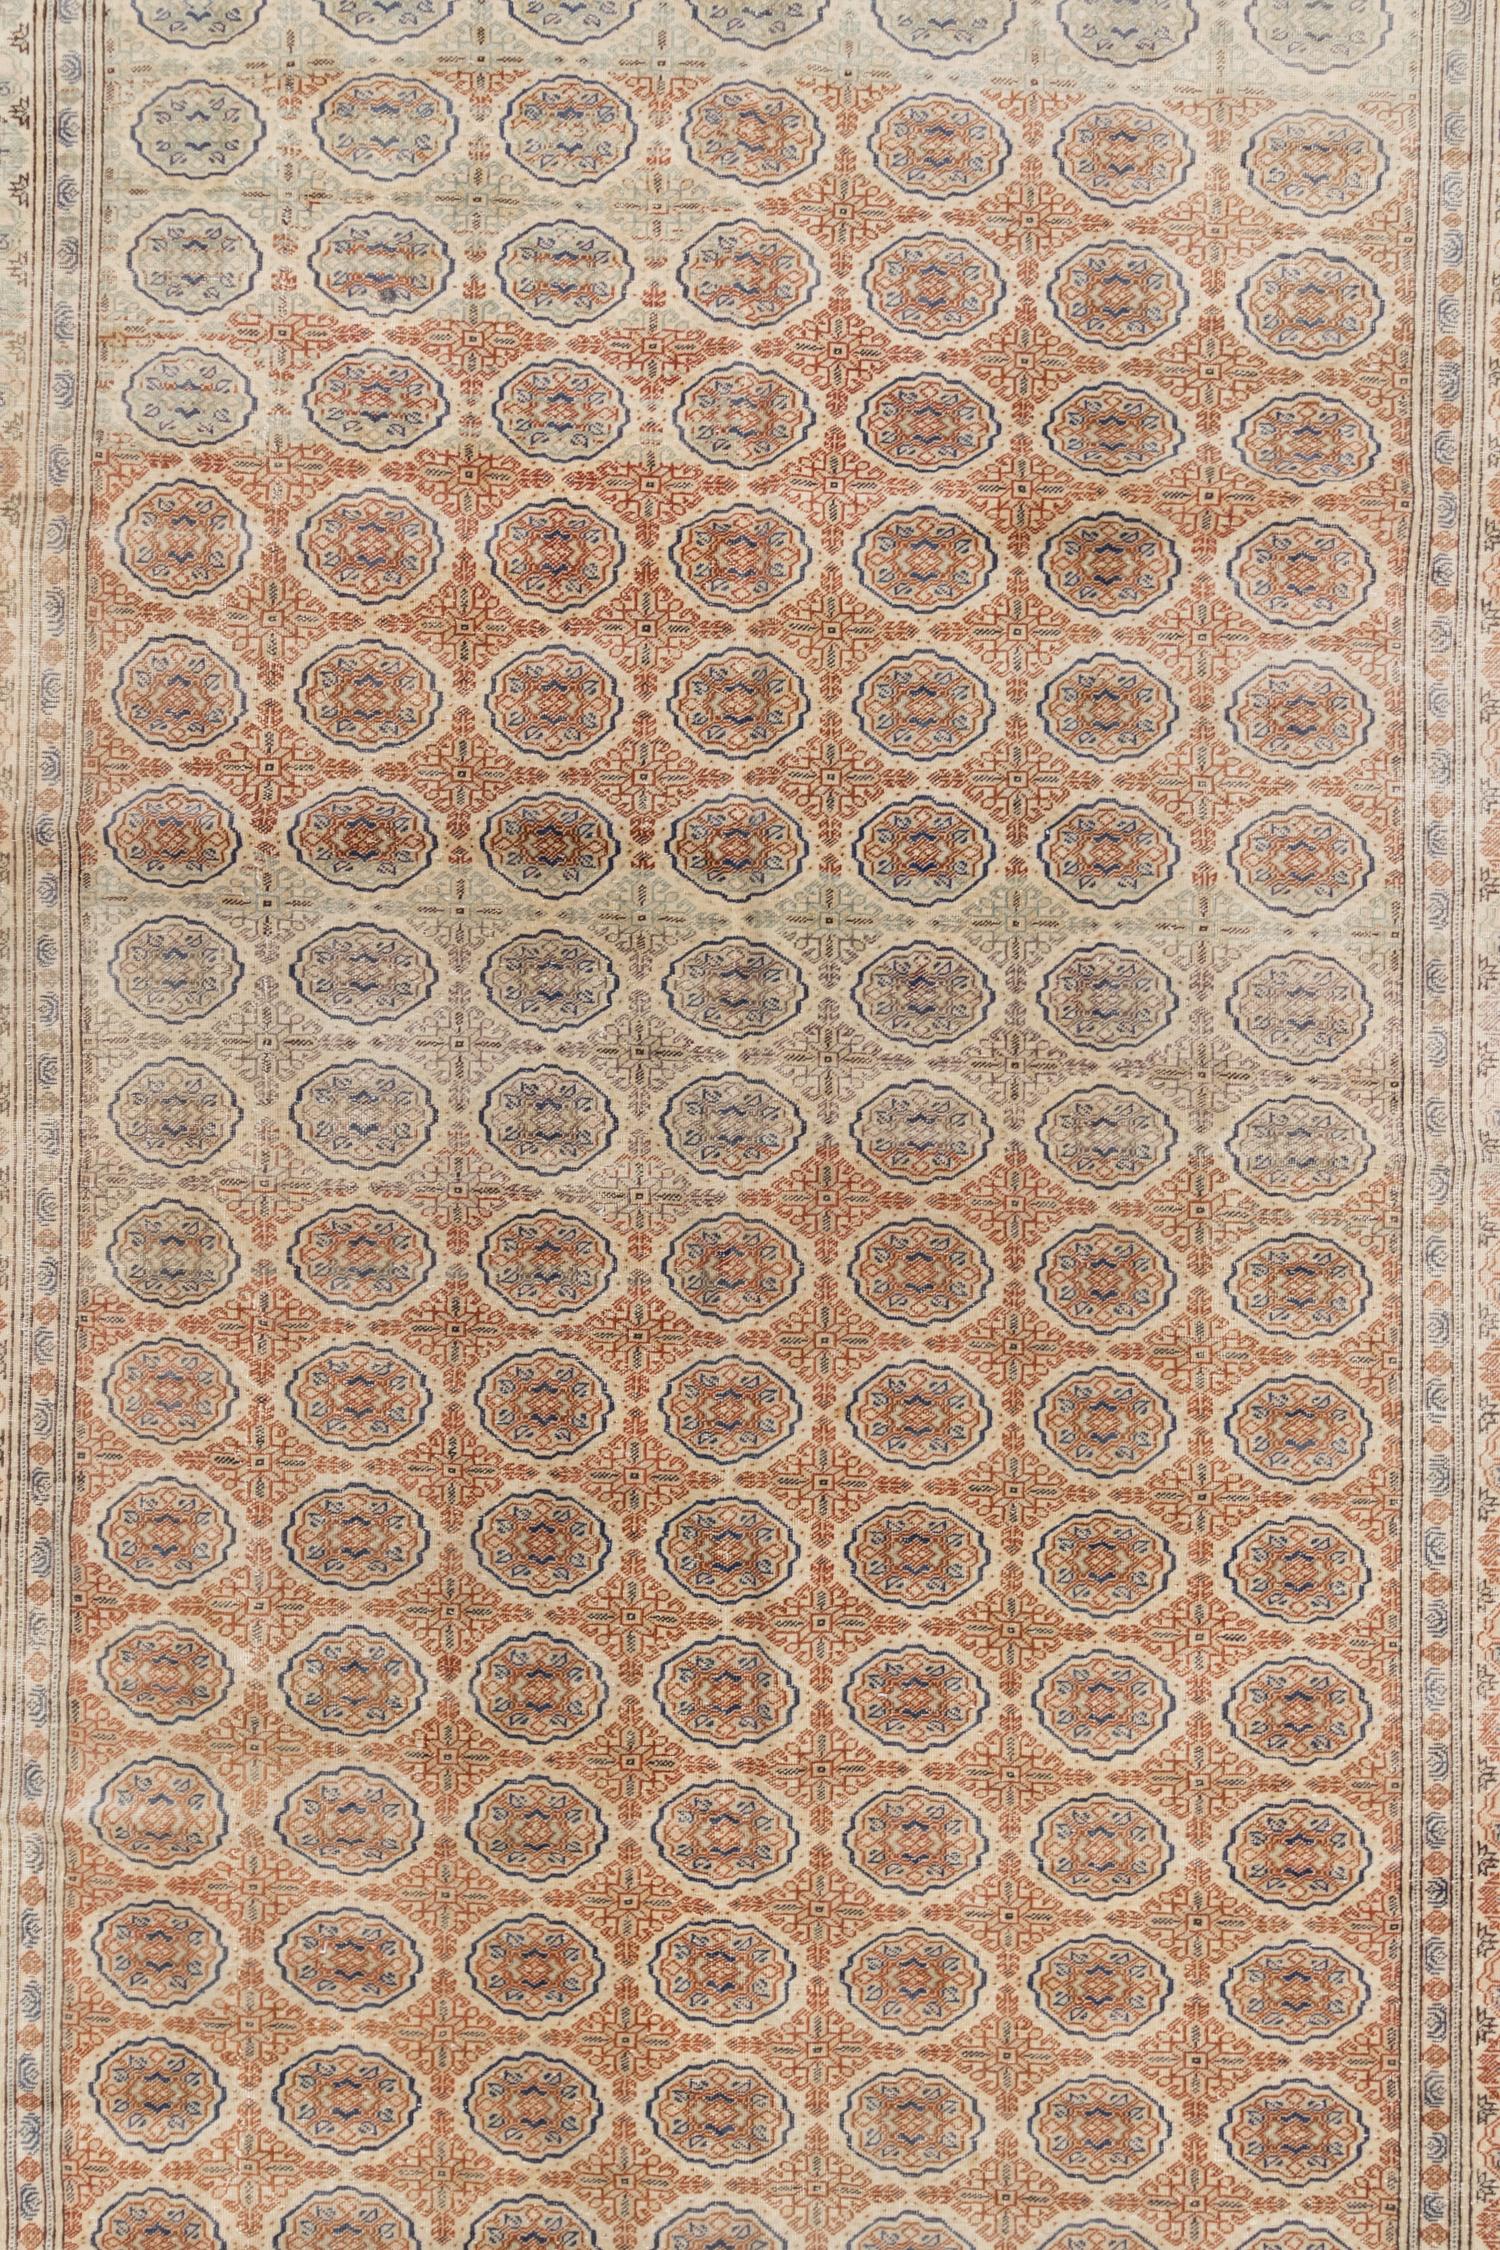 Age: 1930

Material: Wool on Cotton

Wear Guide: 1

Wear Notes:
Vintage and antique rugs are by nature, pre-loved and may show evidence of their past. There are varying degrees of wear to vintage rugs; some show very little and some show a